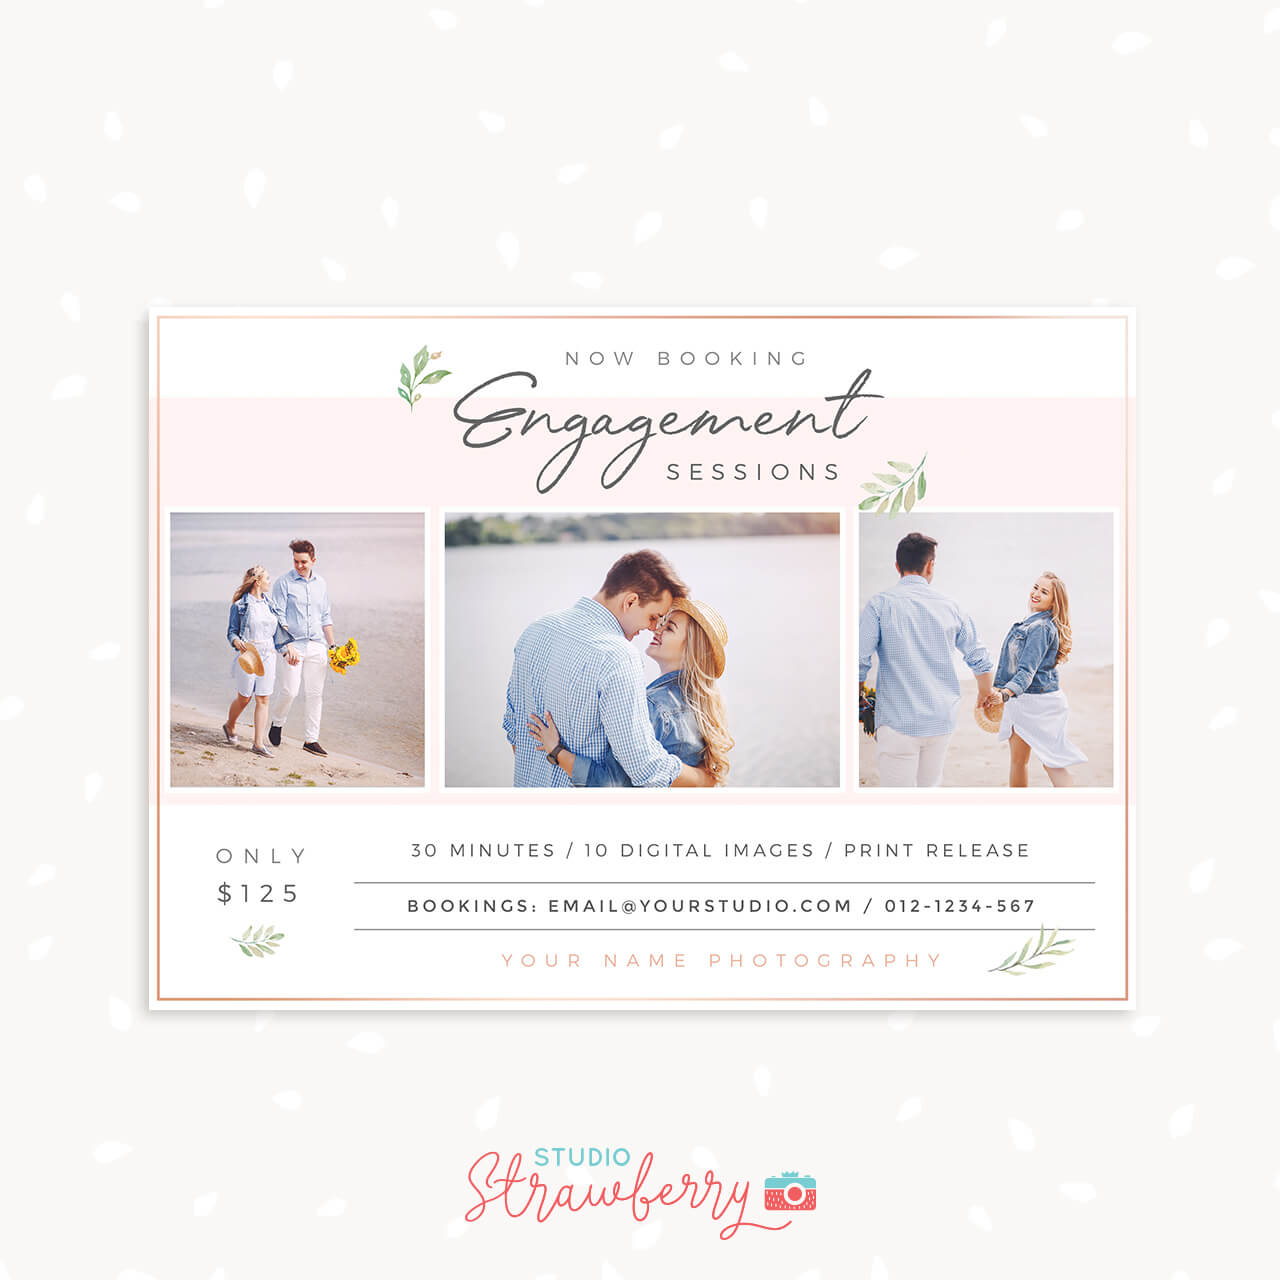 Engagement sessions marketing template